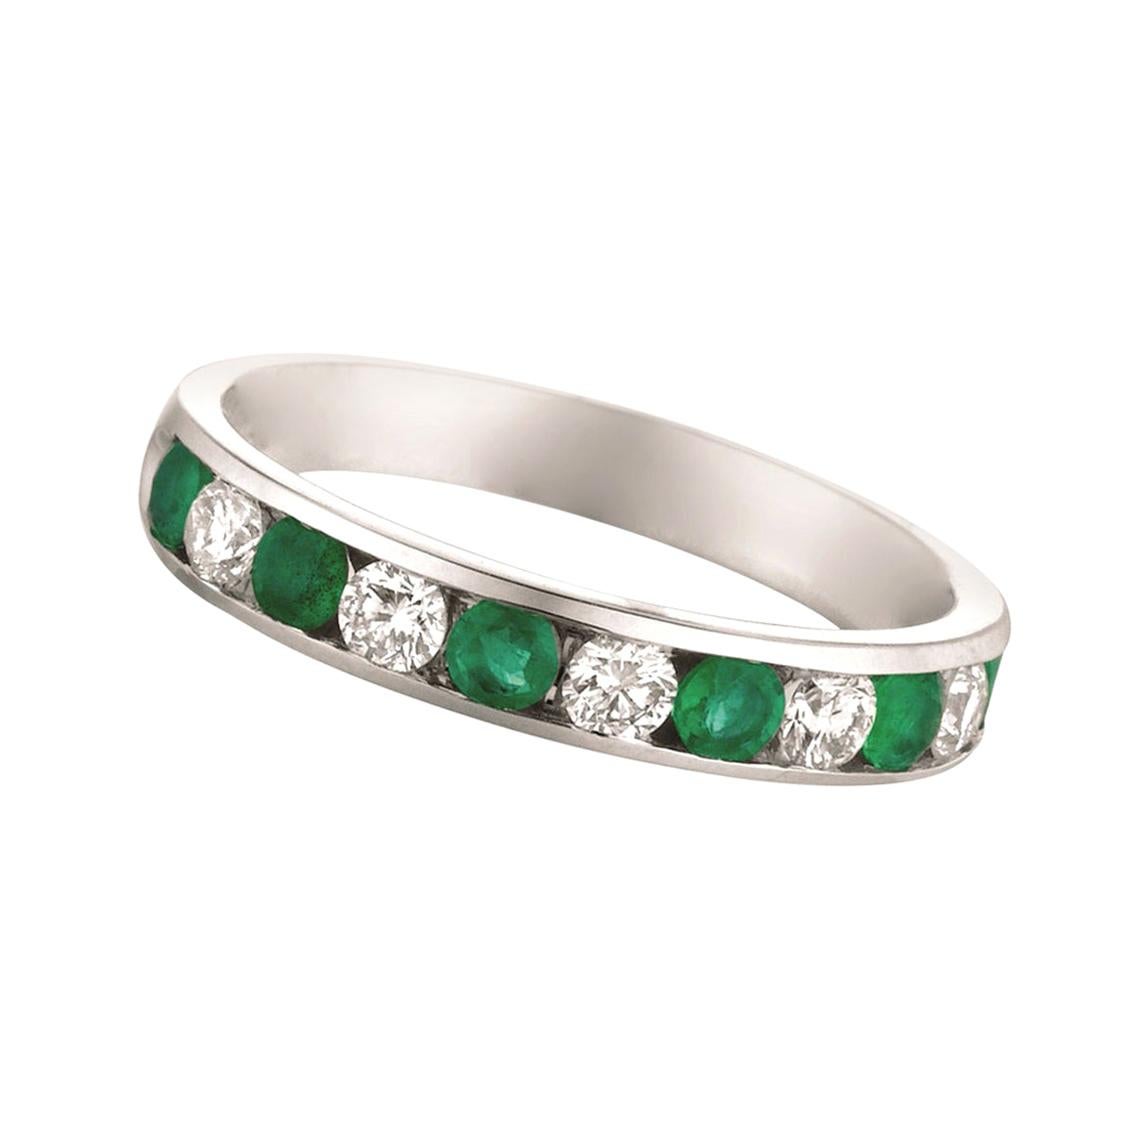 For Sale:  0.80 Carat Natural Emerald and Diamond Ring 14 Karat White Gold